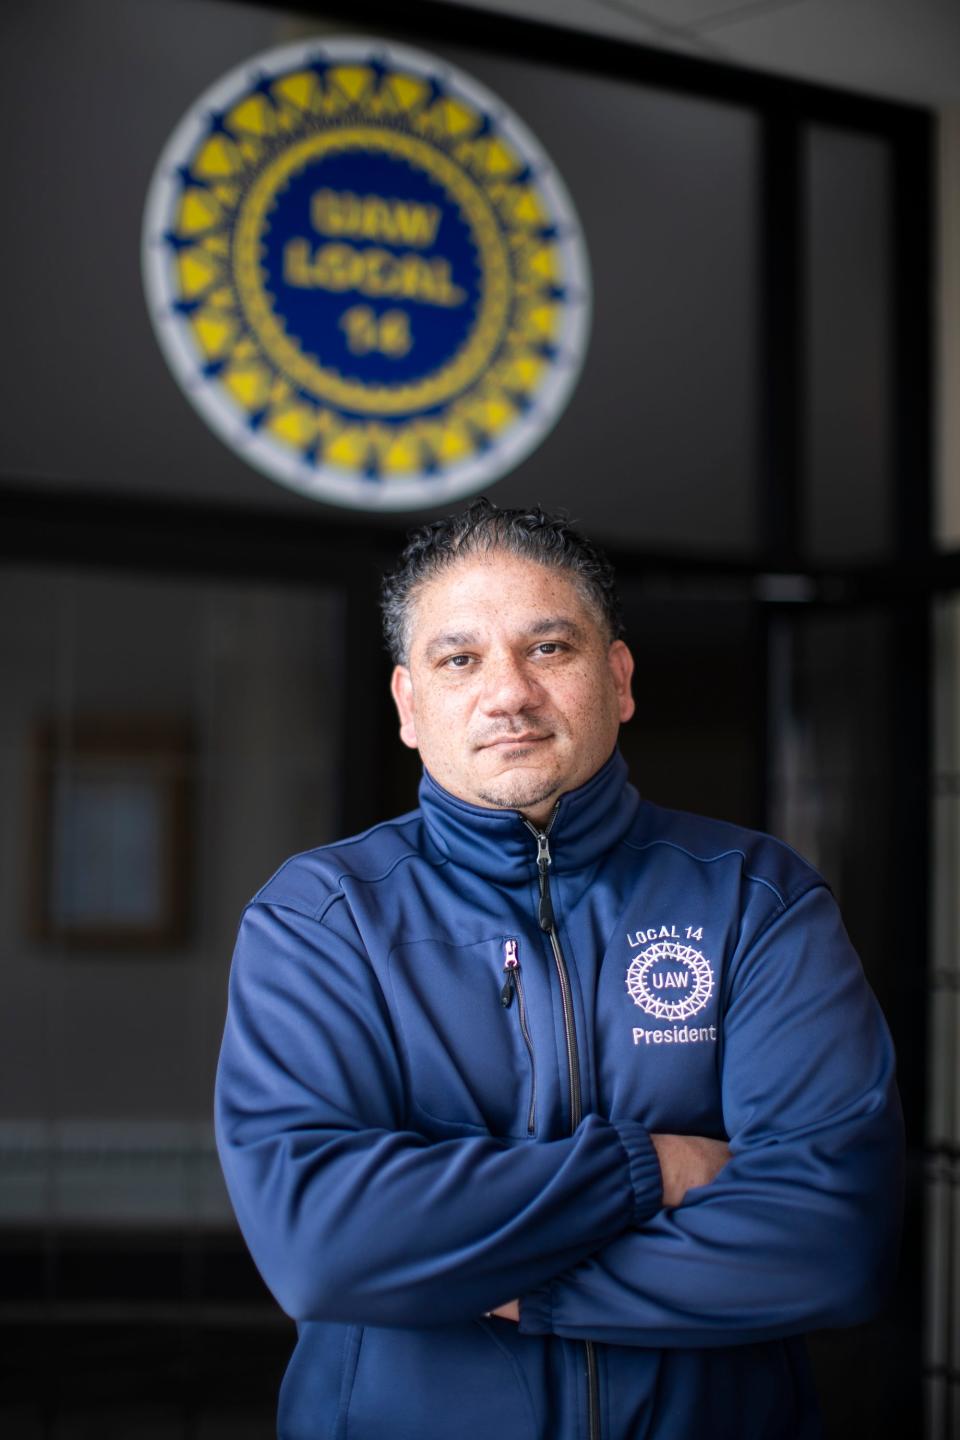 Tony Totty, president of UAW Local 14 in Toledo, says some members of his union support former President Donald Trump, but he thinks they will back Democratic Congresswoman Marcy Kaptur in November.